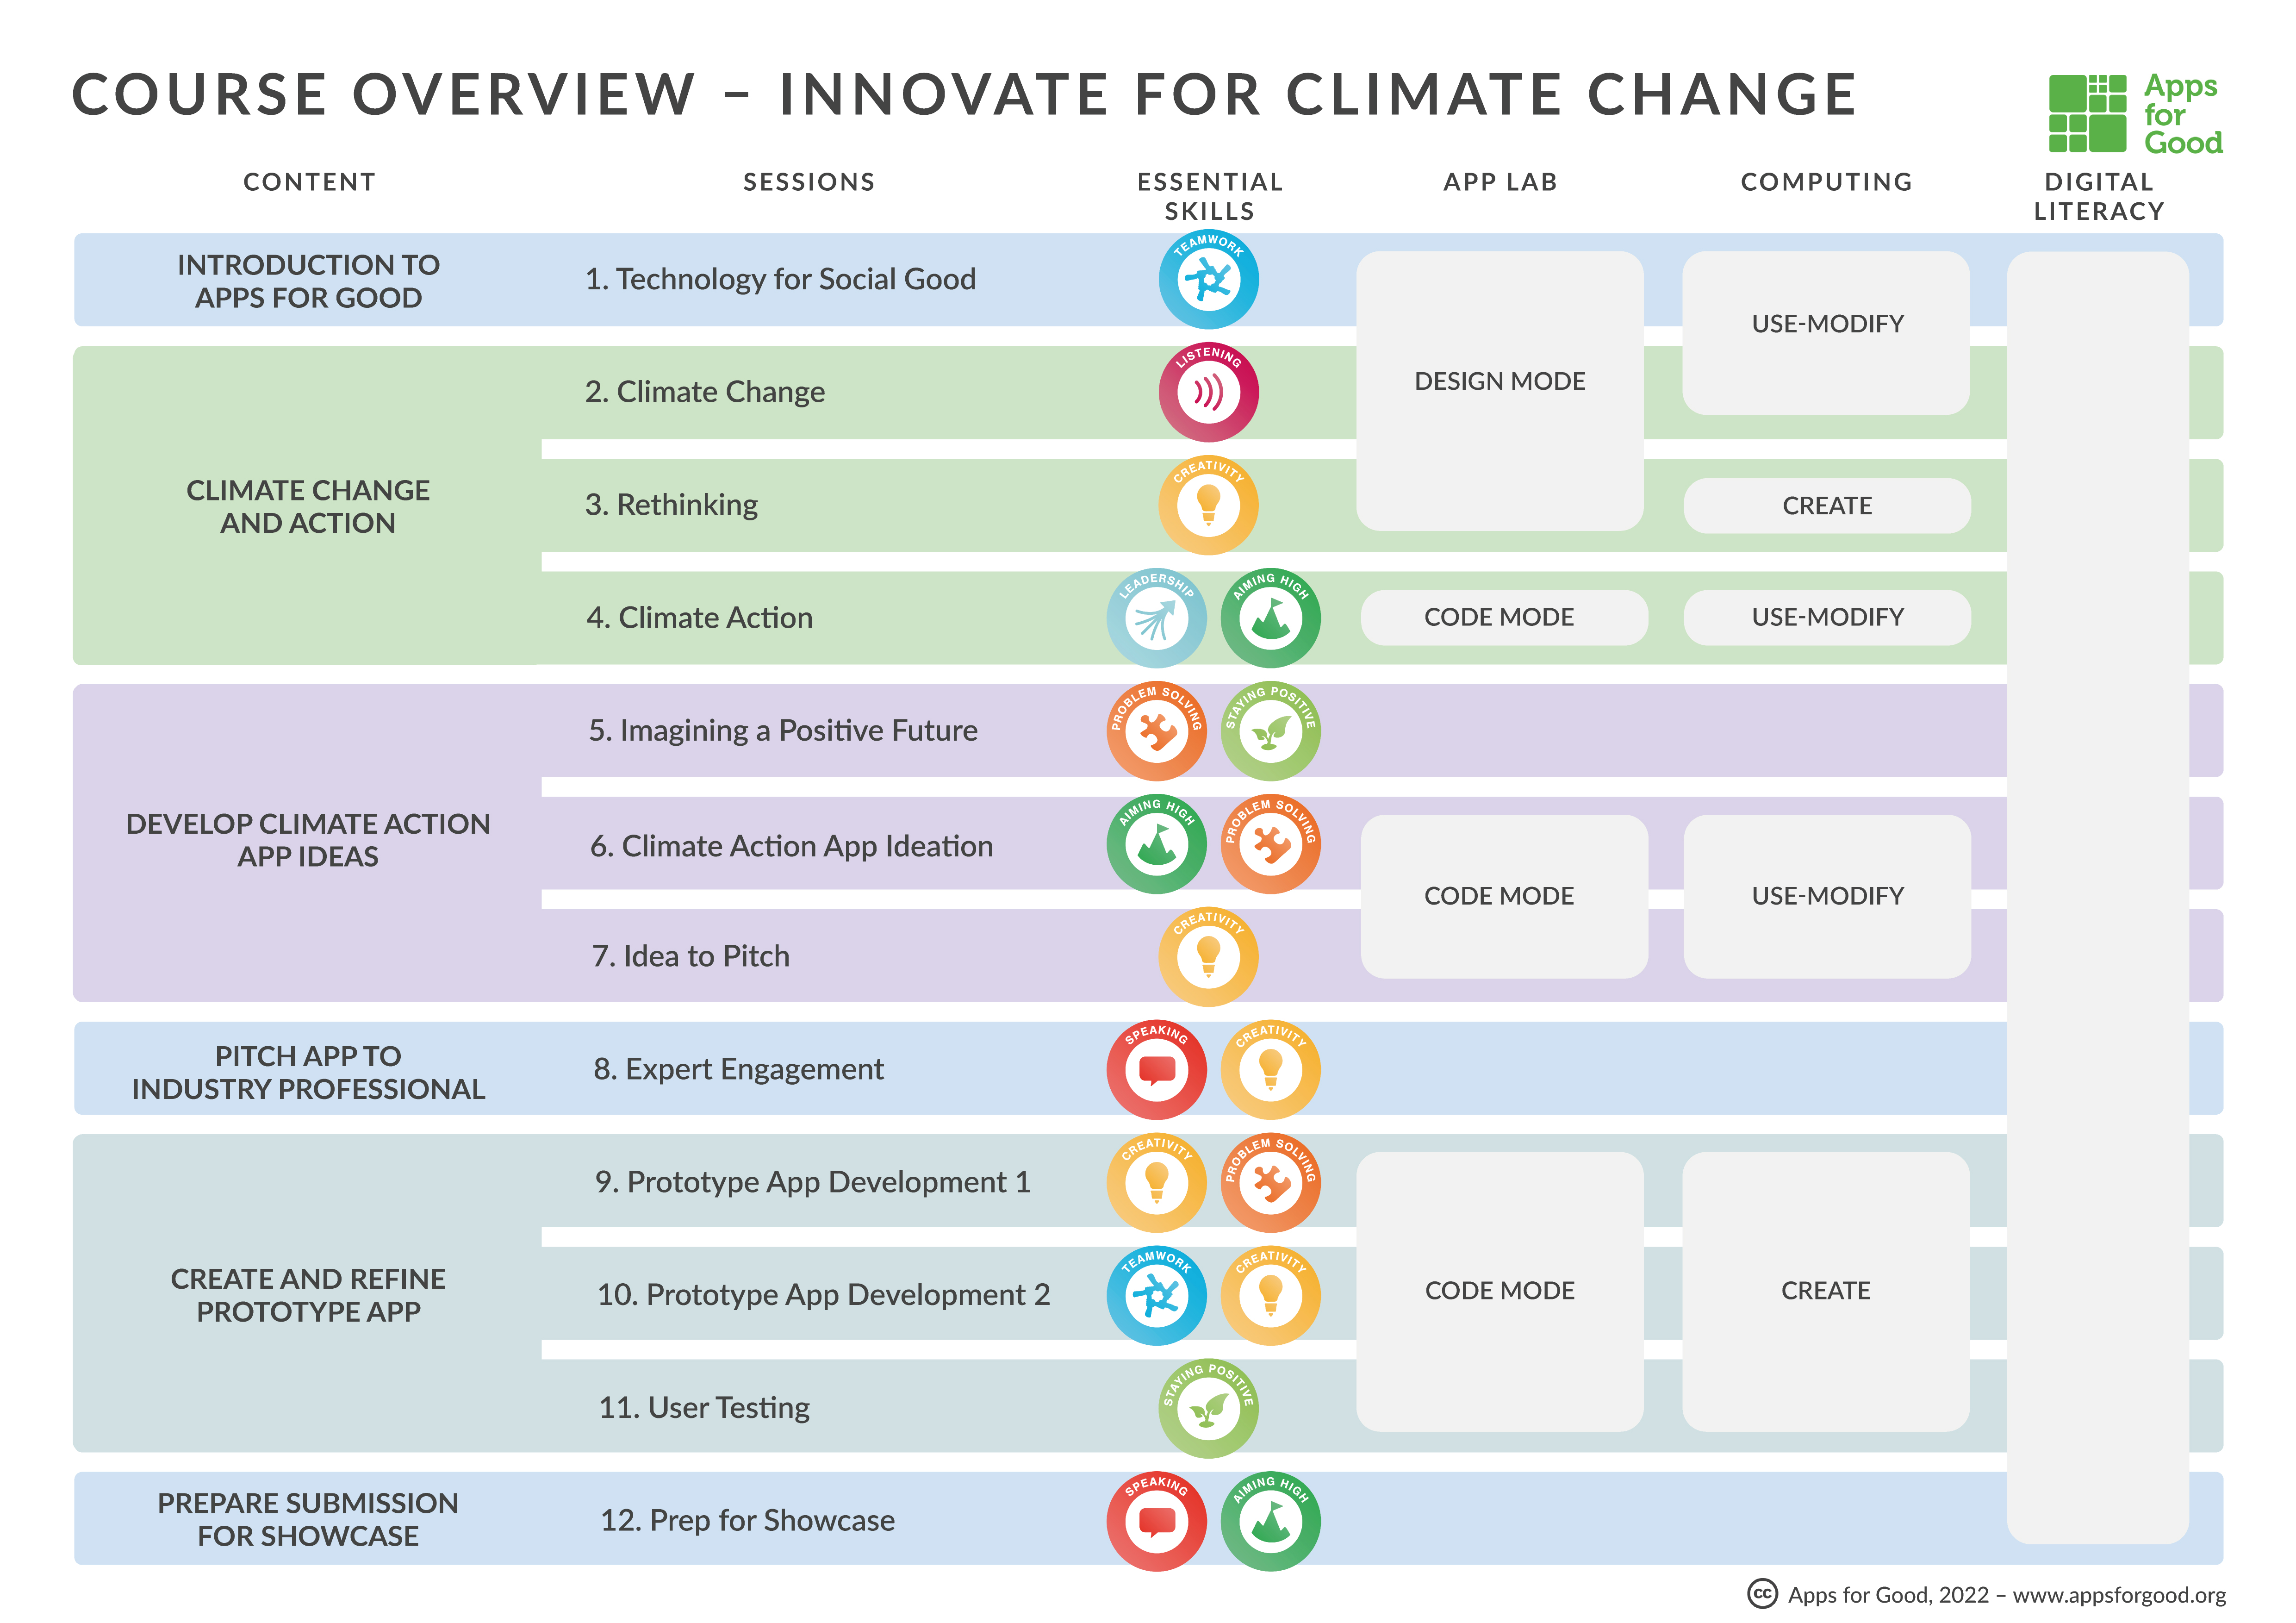 Innovate for Climate Change course overview